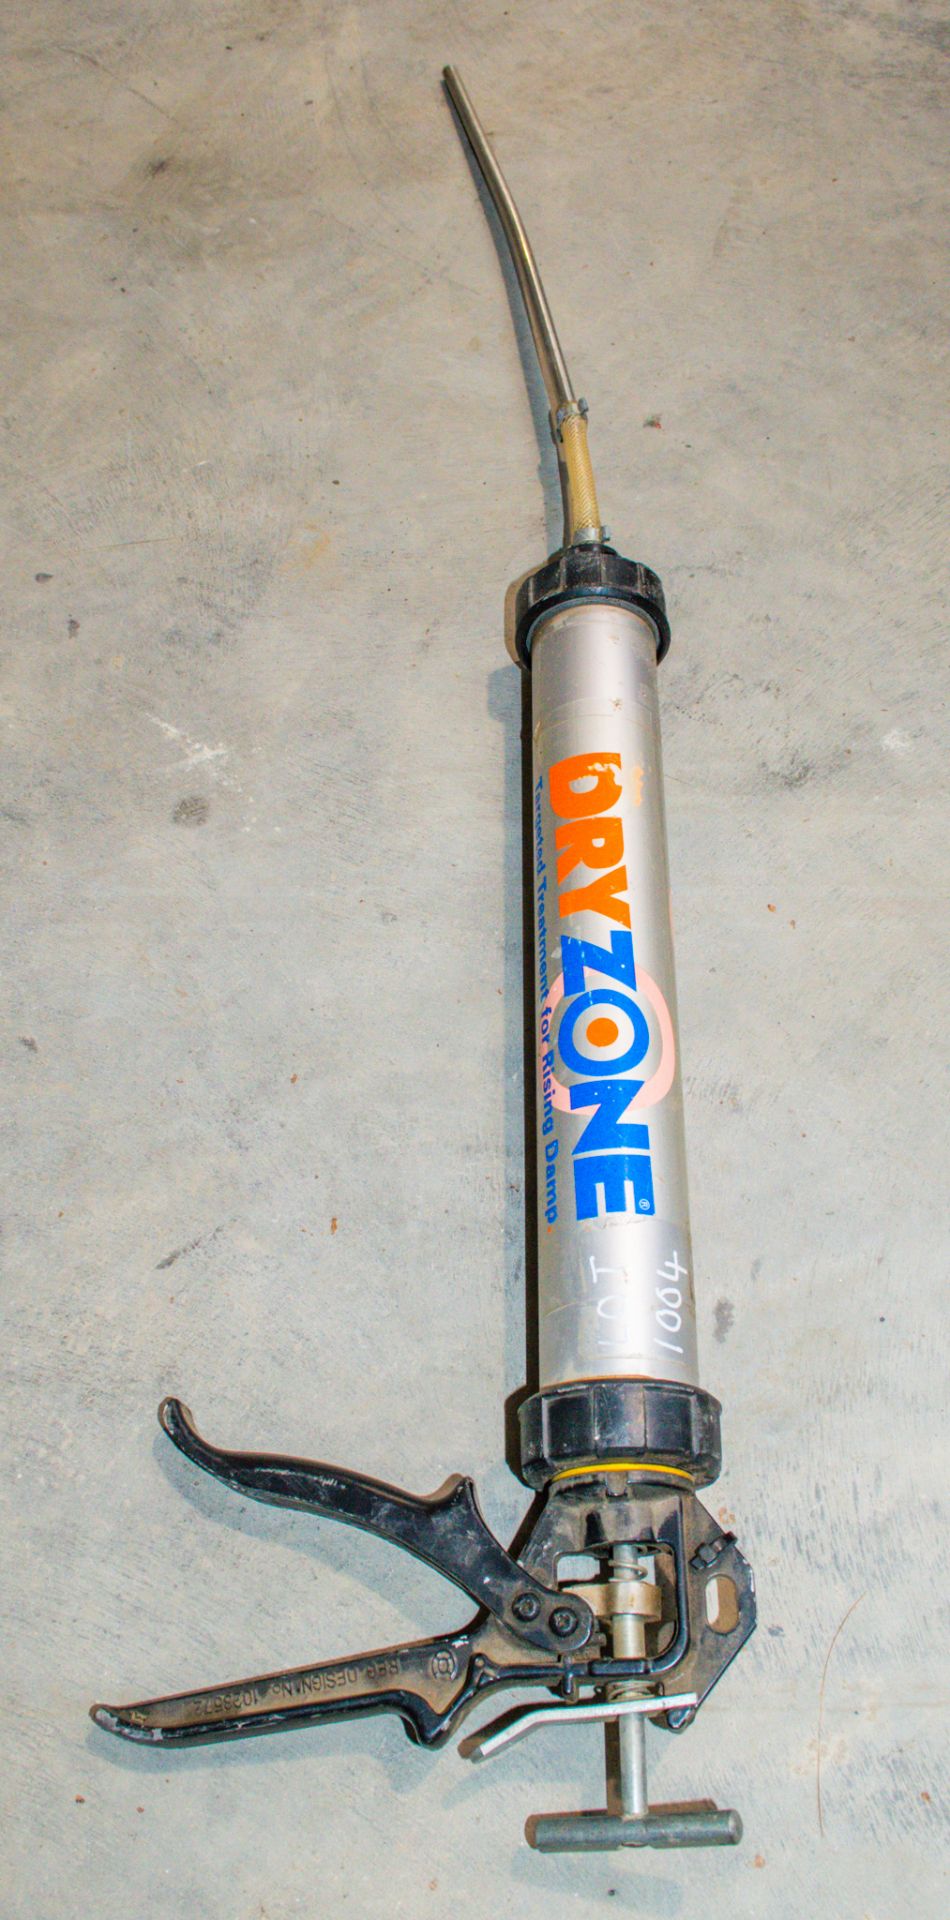 Dry Zone damp proof course applicator